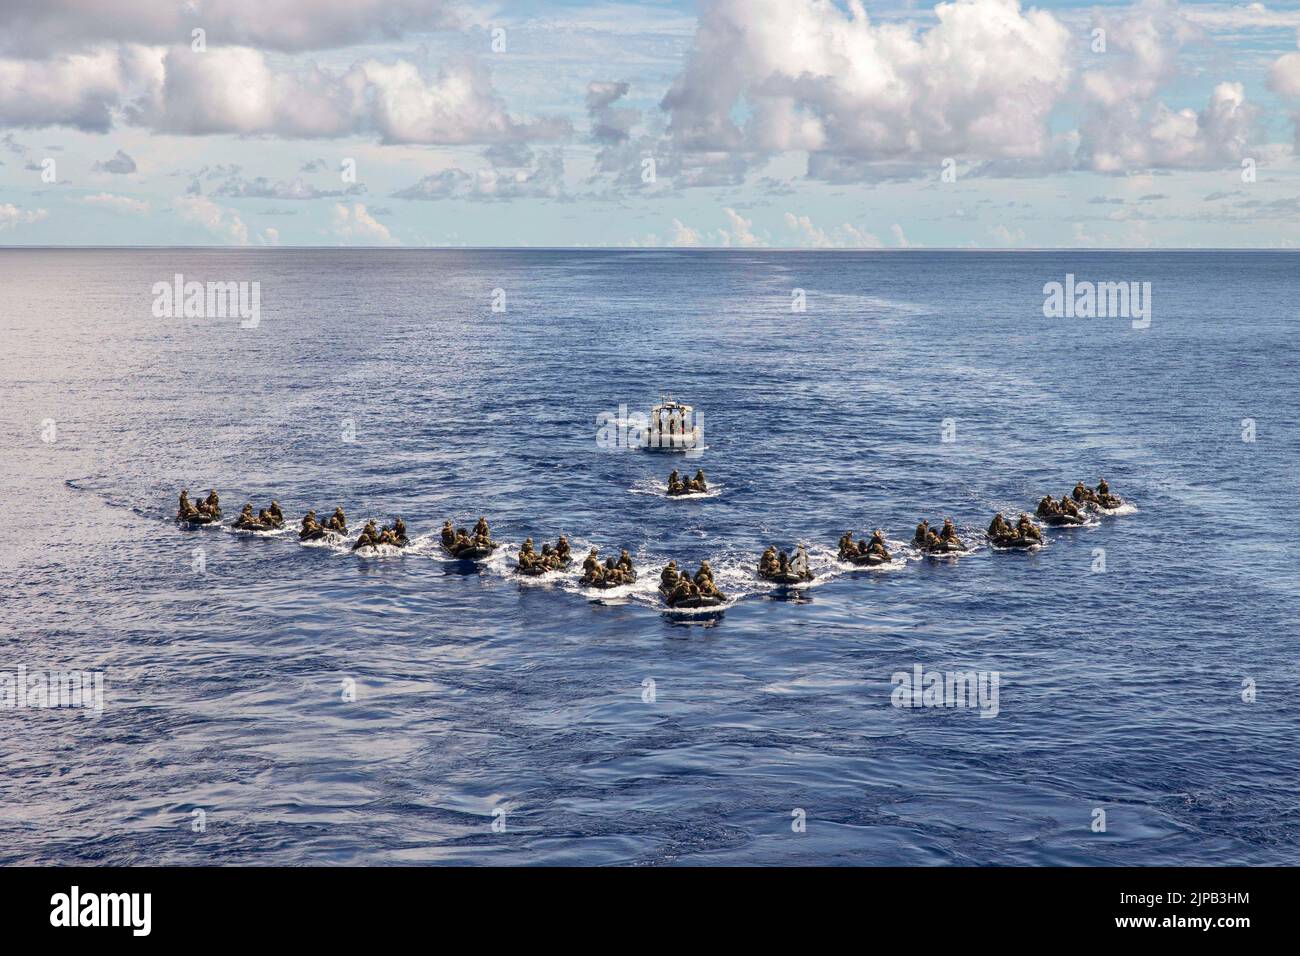 August 6, 2022 - LPD 18, Philippine Sea - U.S. Marines with Battalion Landing Team 2/5, 31st Marine Expeditionary Unit, navigate in formation during a company formation exercise off the USS New Orleans (LPD 18) in the Philippine Sea, August. 6, 2022. Blackhearts practiced formations on the water to refine infantry tactics. The 31st MEU is operating aboard the ships of the Tripoli Expeditionary Strike Group in the 7th fleet area of operations to enhance interoperability with allies and partners and serve as a ready response force to defend peace and stability in the Indo-Pacific Region. (Credi Stock Photo